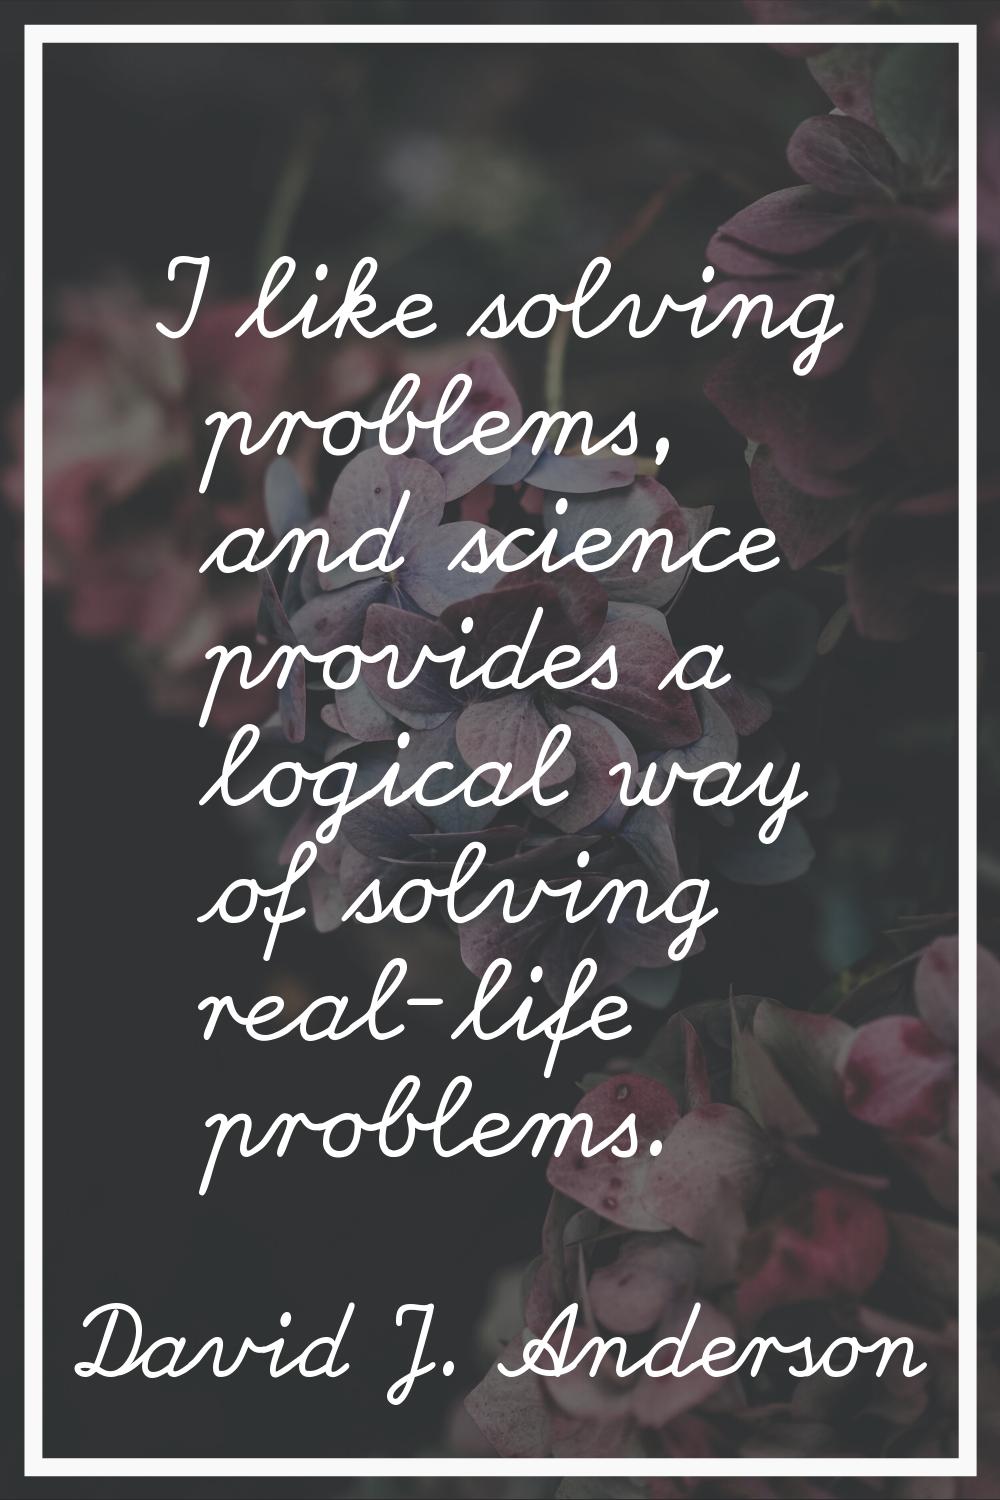 I like solving problems, and science provides a logical way of solving real-life problems.